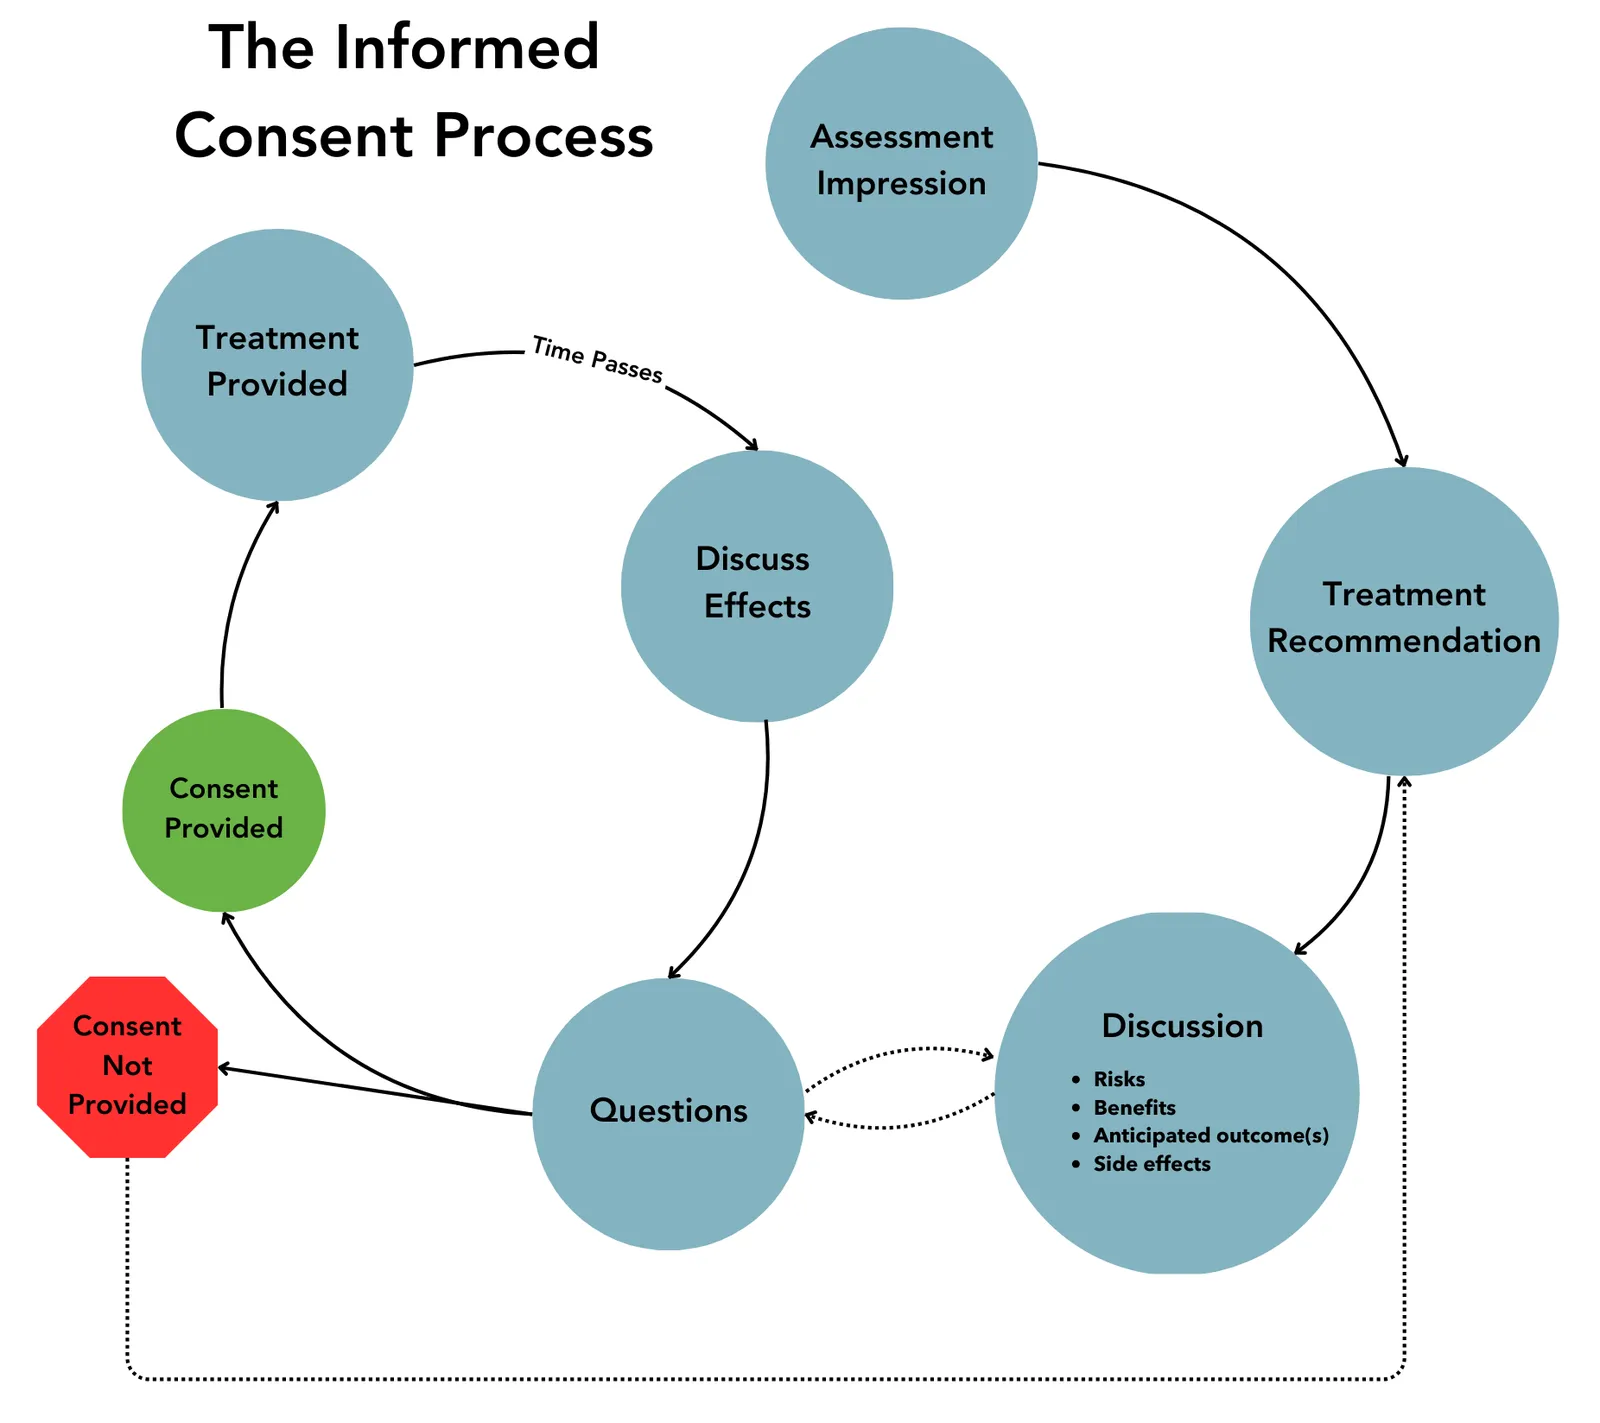 The Informed Consent Process